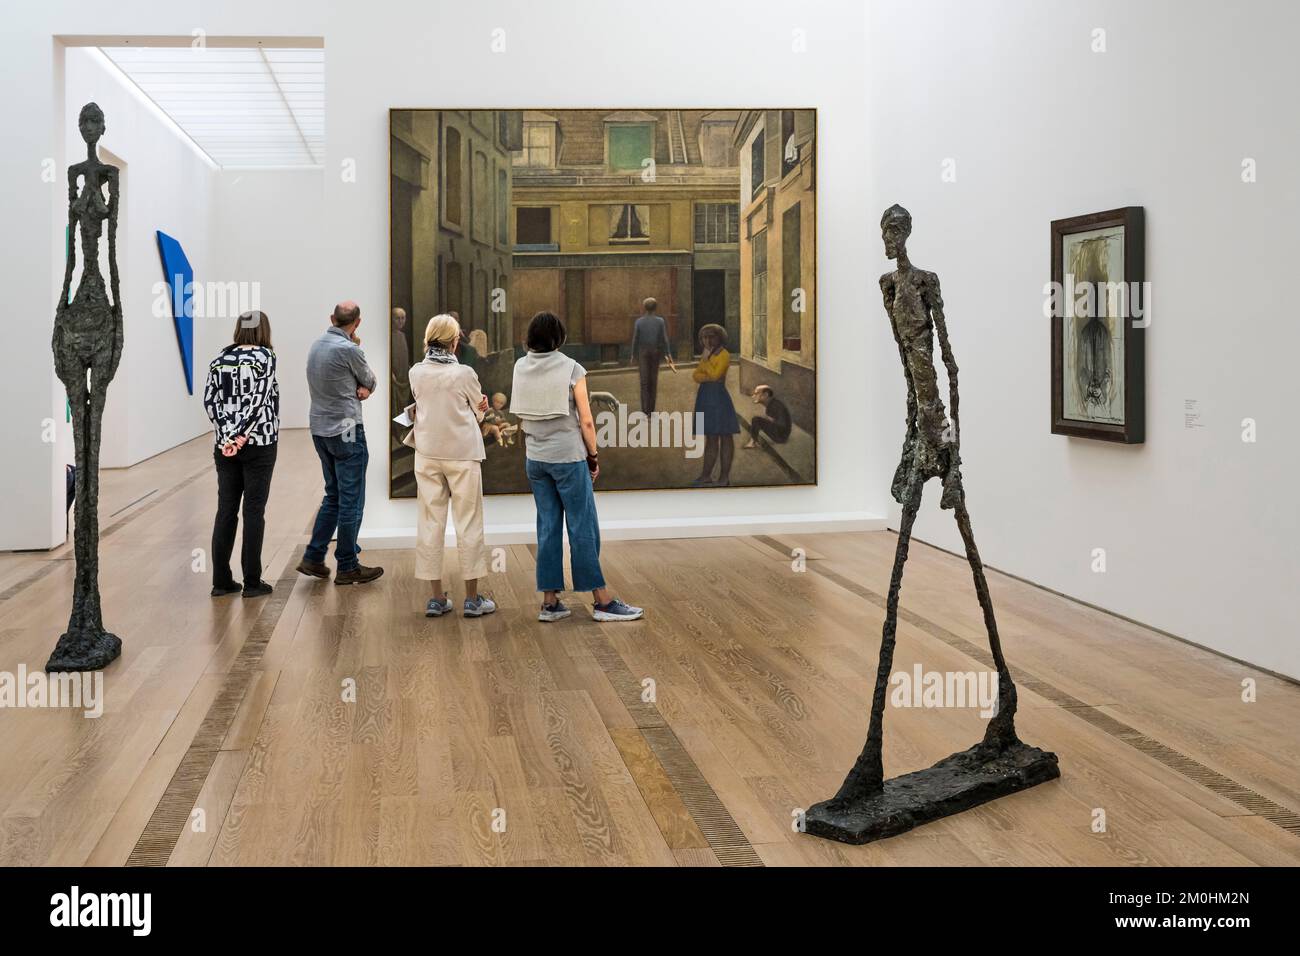 Switzerland, Basel, Riehen, Beyeler Foundation, Large Woman IV (1960) and The Walking Man (1960) by Alberto Giacometti, Passage du Commerce-Saint-Andr? (1952-1954) by Balthus in the background Stock Photo